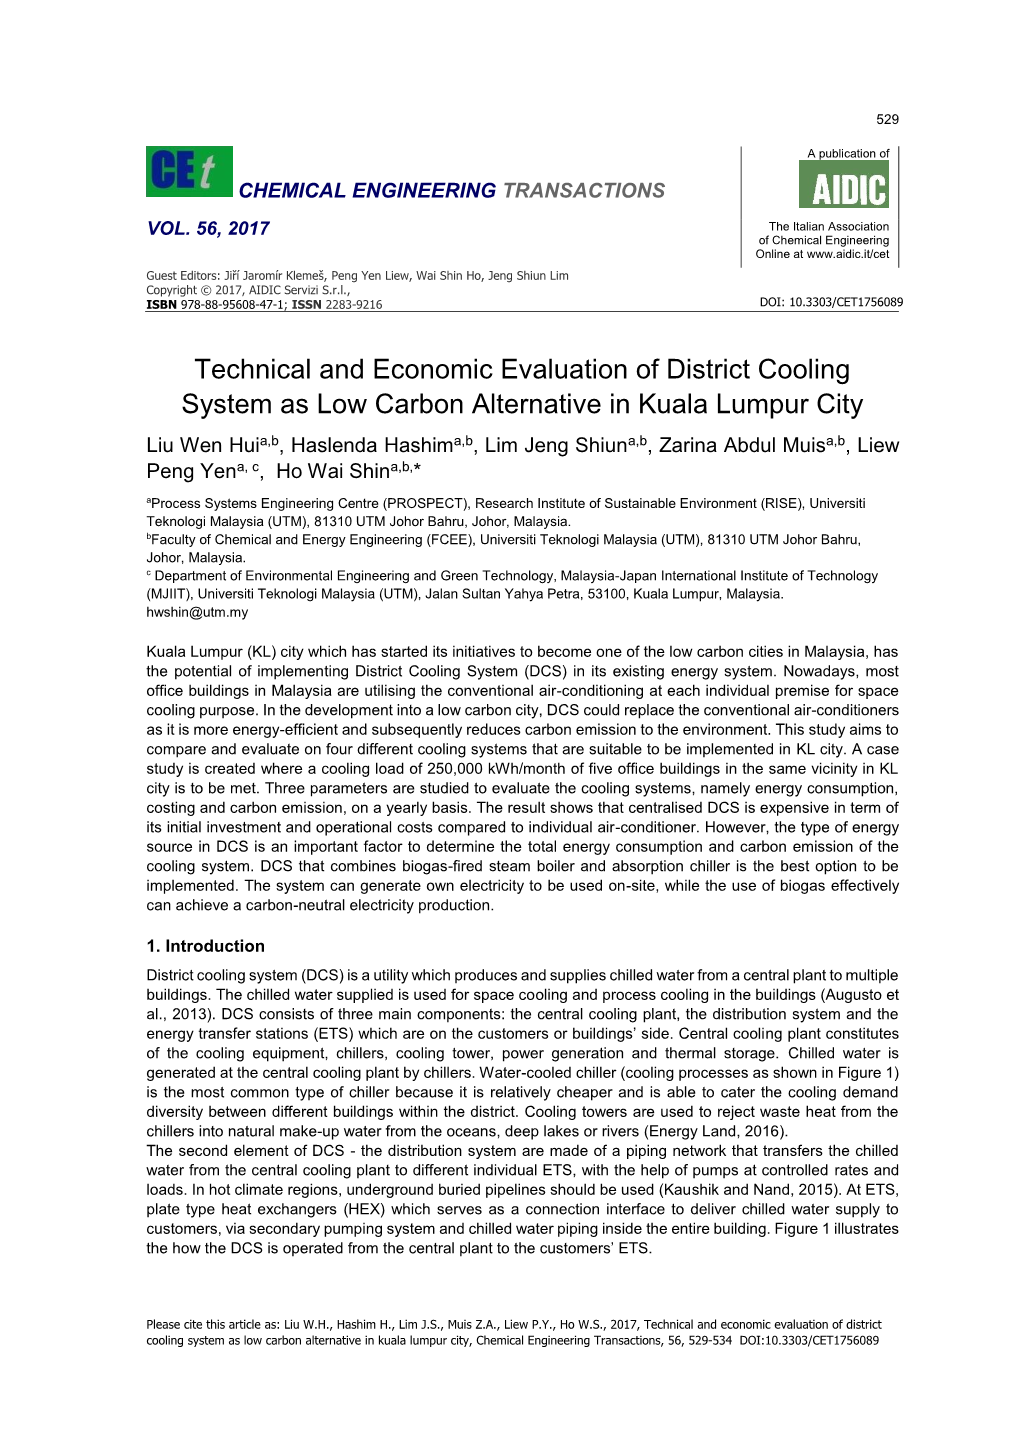 Technical and Economic Evaluation of District Cooling System As Low